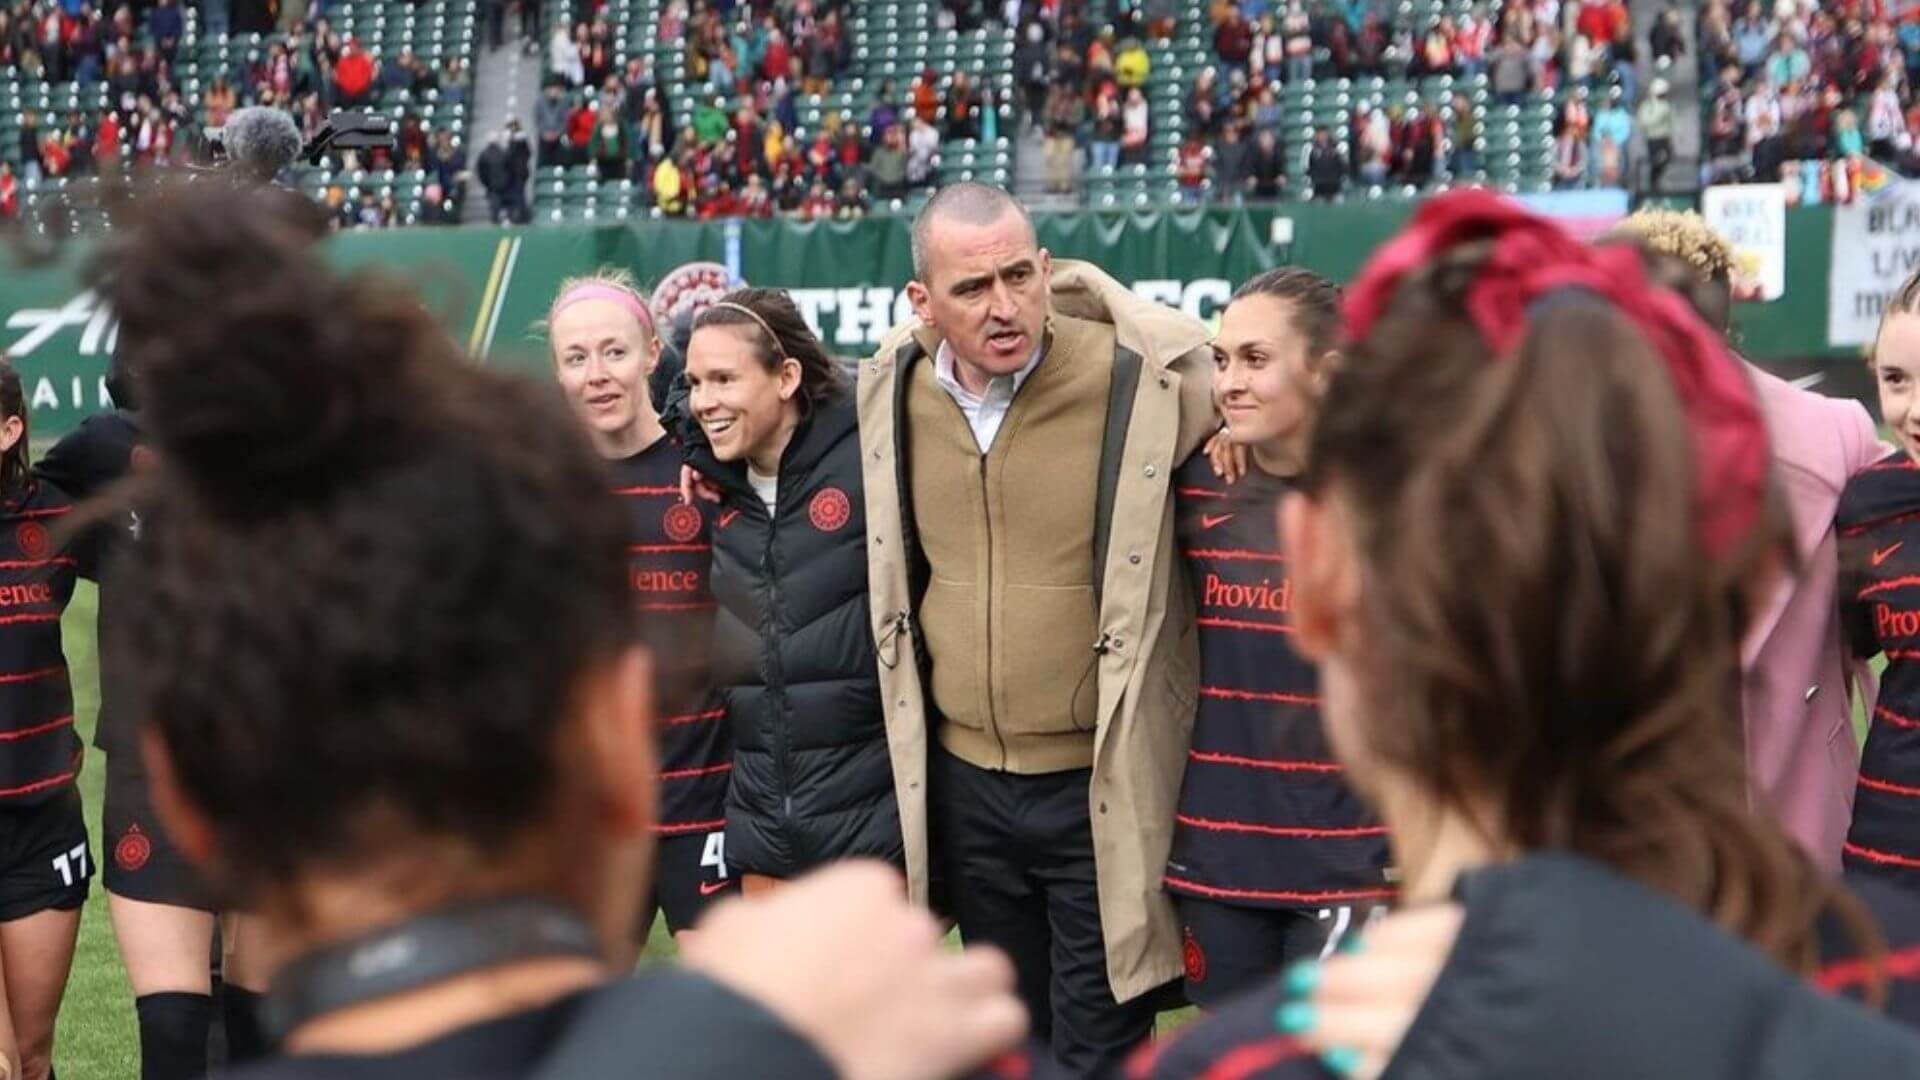 Mike Norris is one of the new NWSL coaches this year